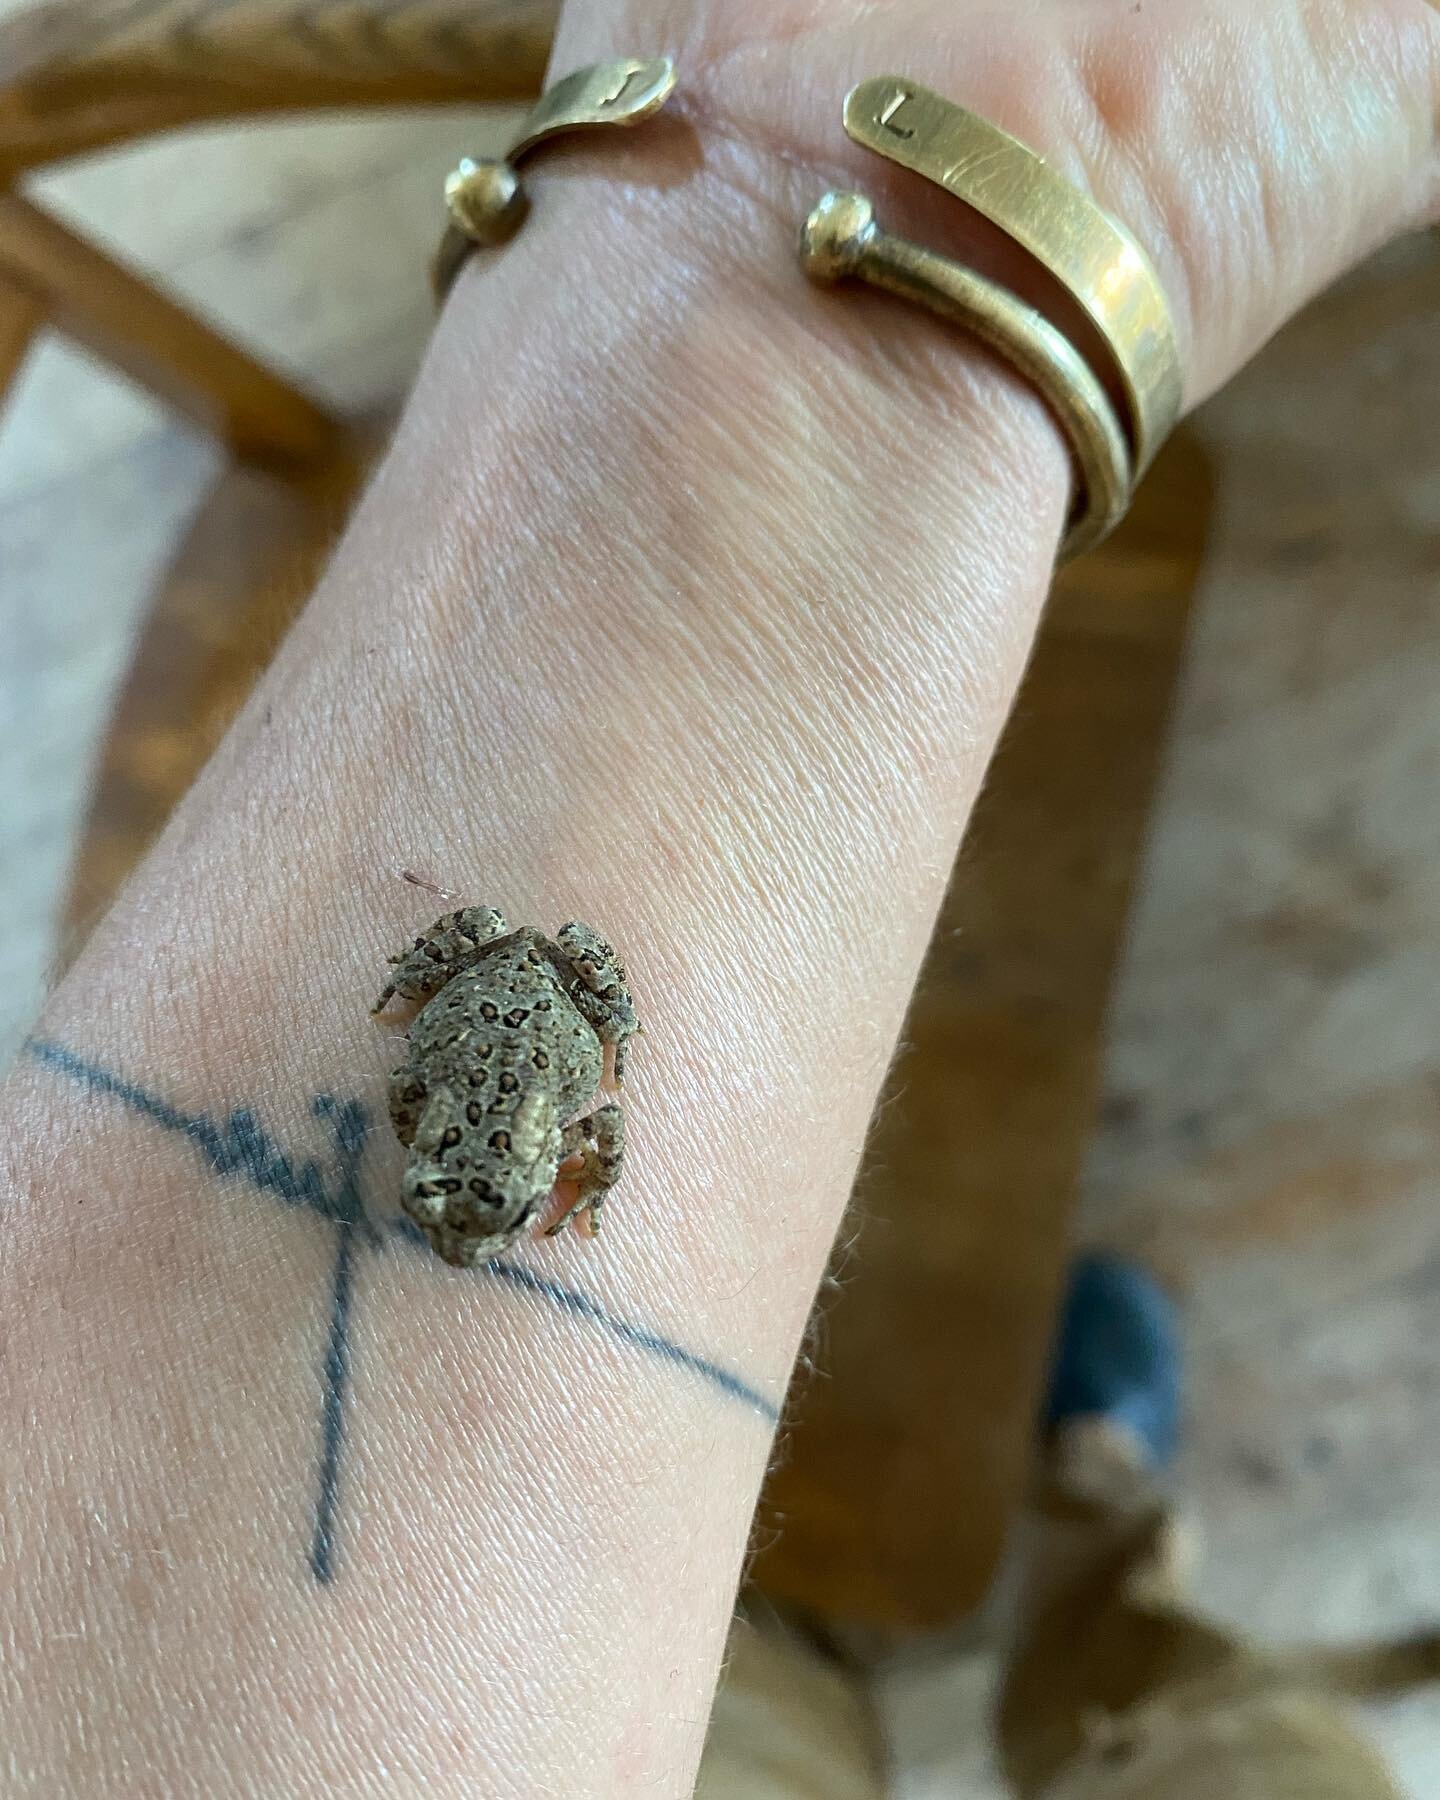 I found a tiny sweet lil baby toad living in the snakement. He has been relocated to a less serpenty spot outside under the forsythia. #ohheybuddy #timetomoveonup